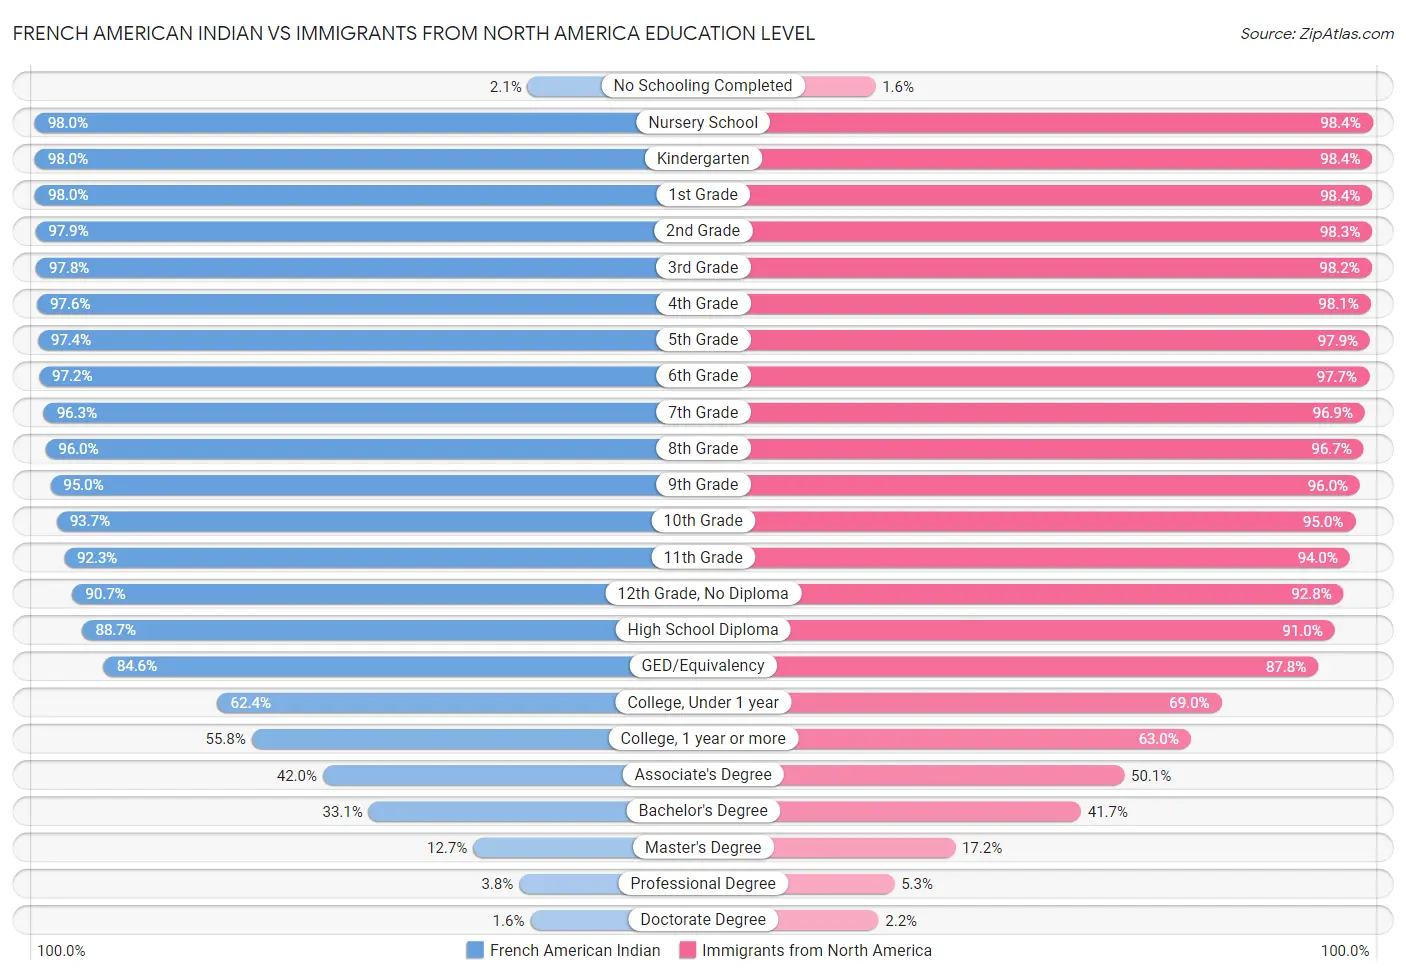 French American Indian vs Immigrants from North America Education Level